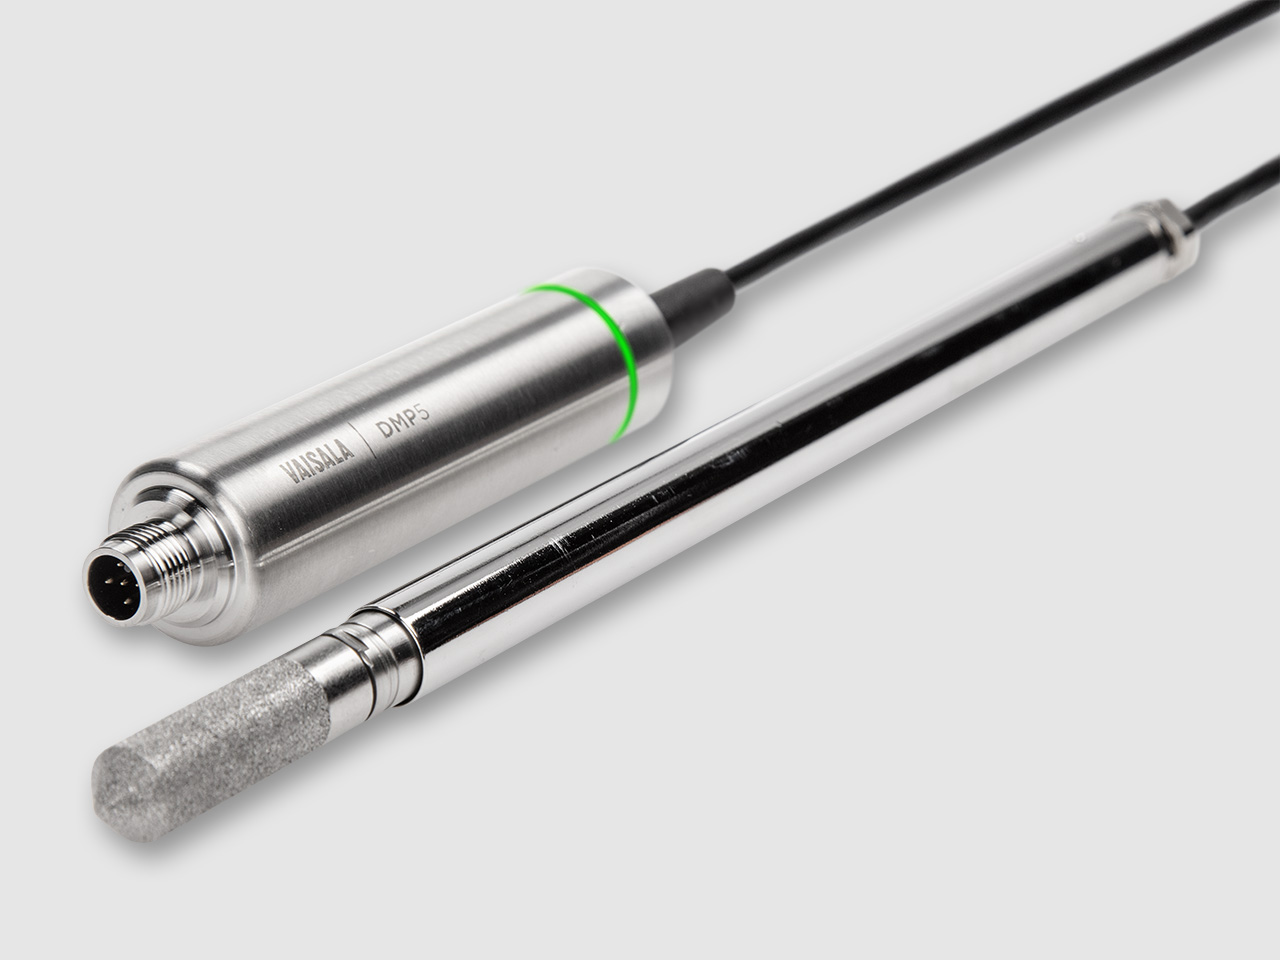 Vaisala DRYCAP ® developed Point and Temperature Probe DMP5 is designed for the in - line humidity measurement in industrial drying applications.